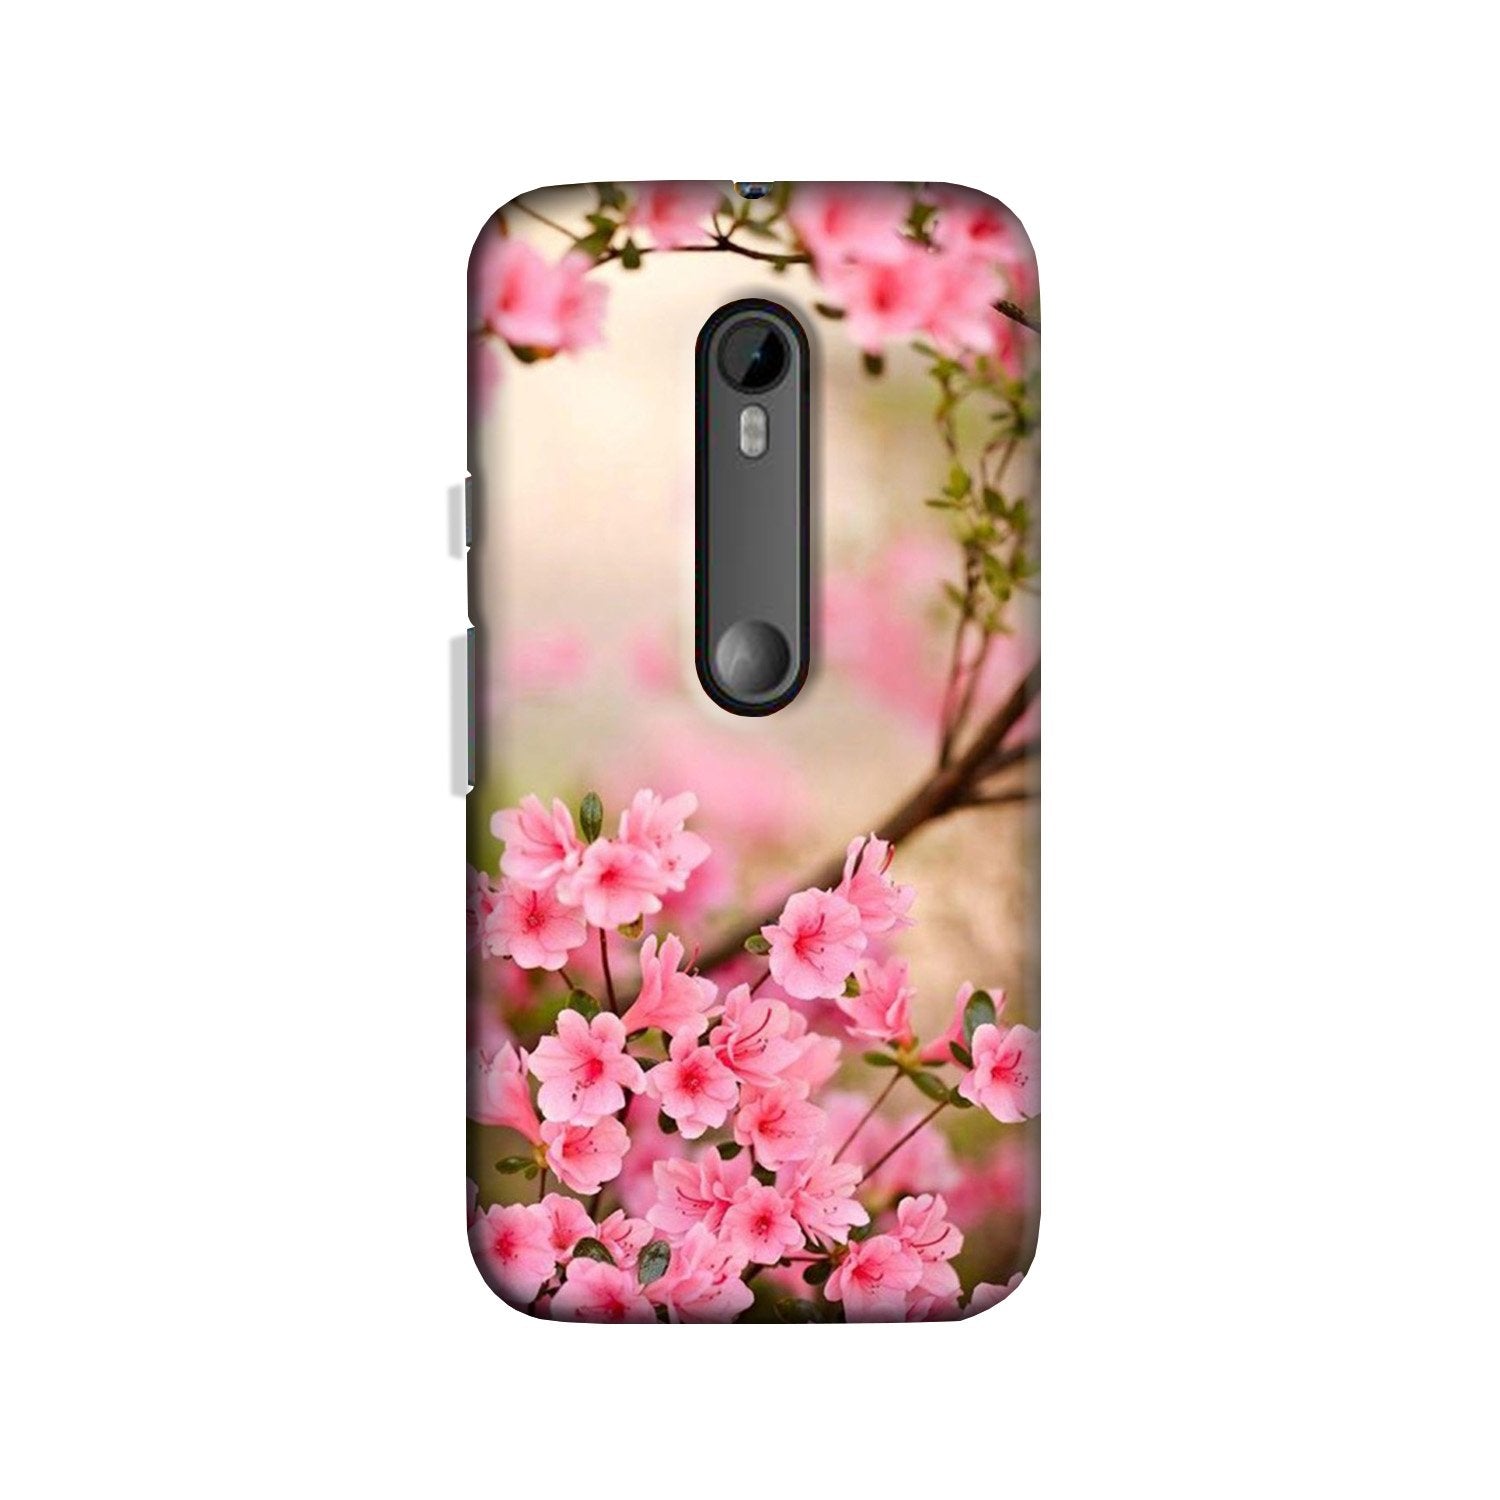 Pink flowers Case for Moto X Style